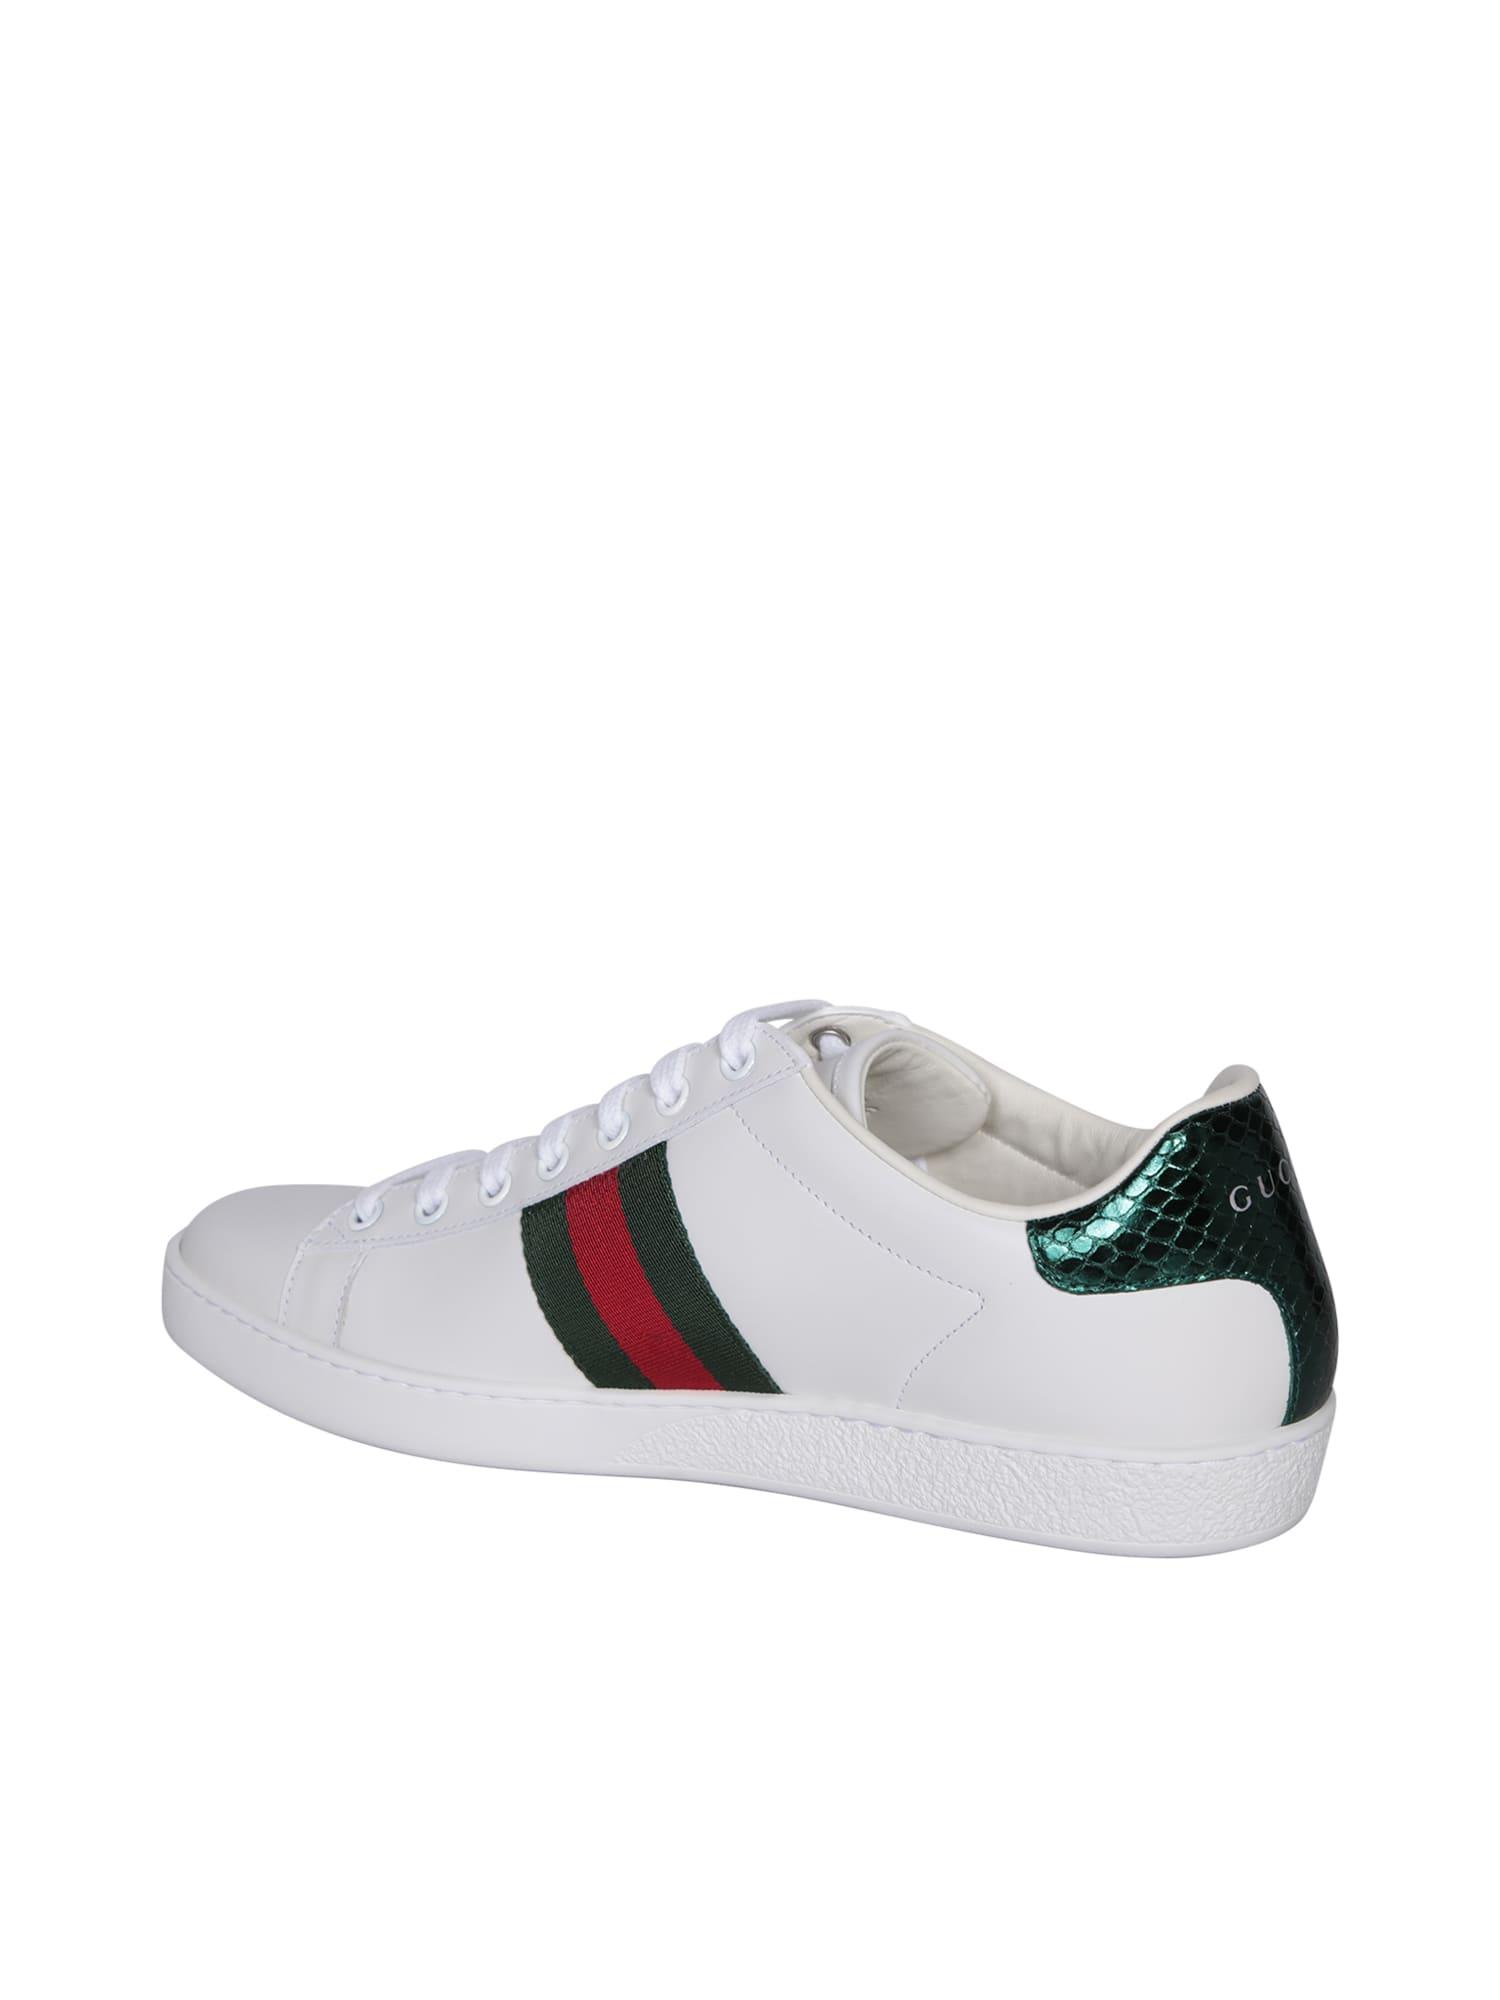 Gucci, Shoes, Gucci Ace Sneakers In Black With Bee Logo